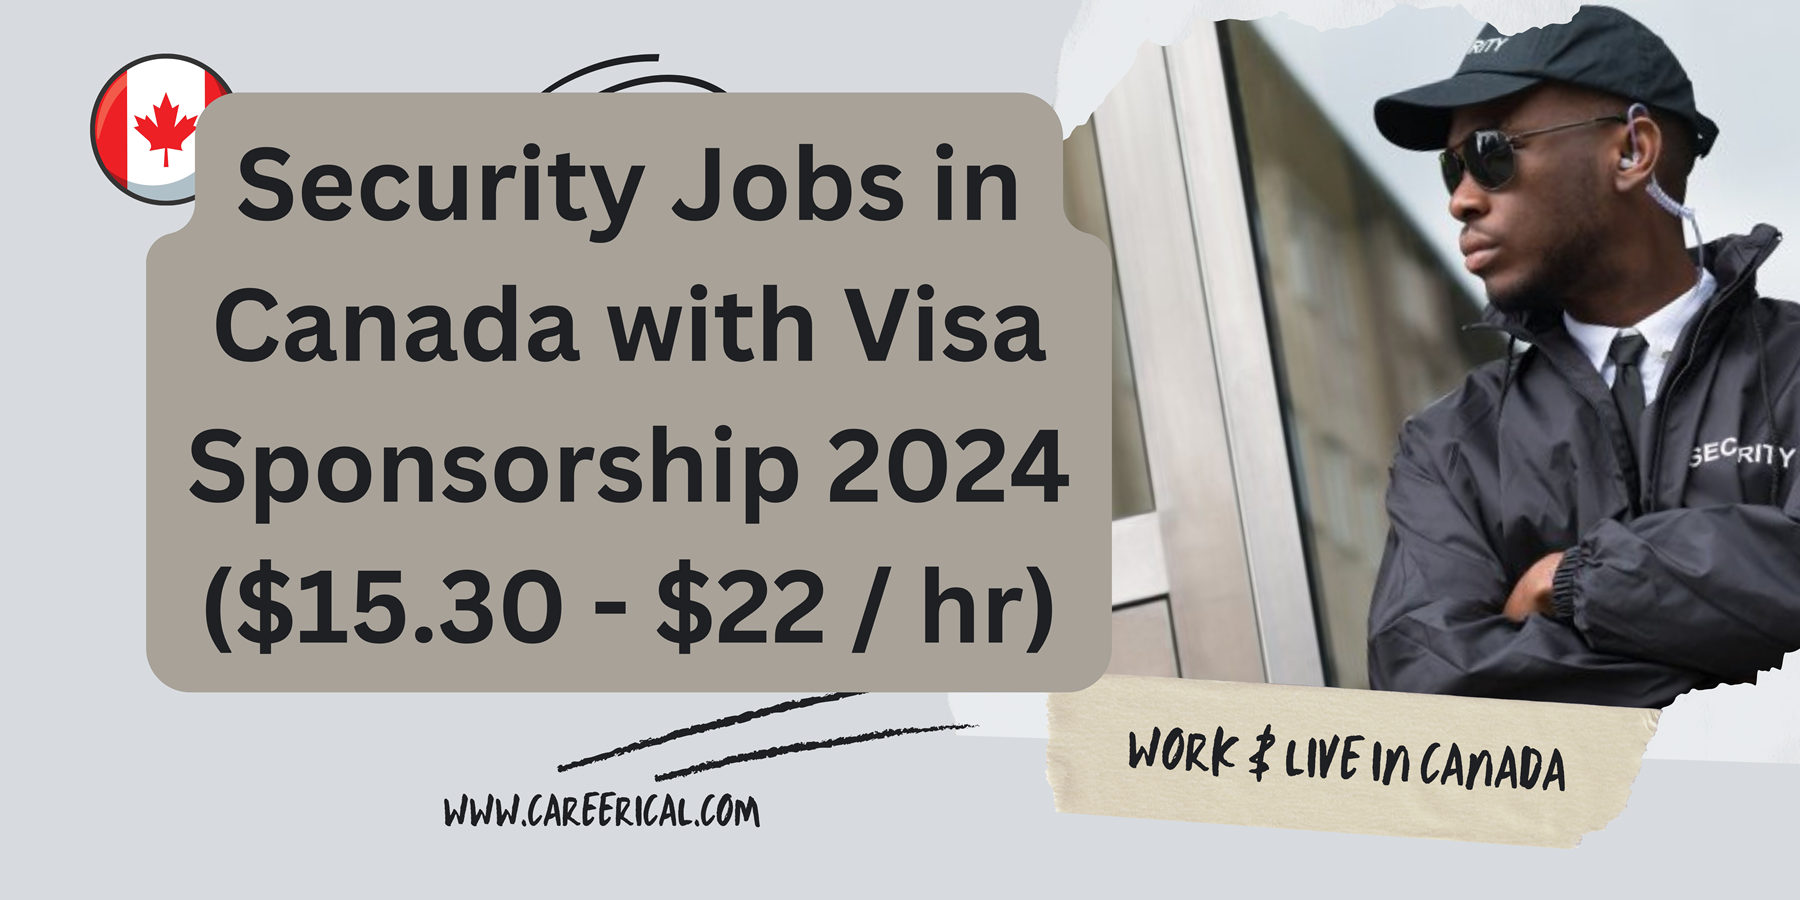 Security Jobs in Canada with Visa Sponsorship 2024 ($15.30 - $22 hr)